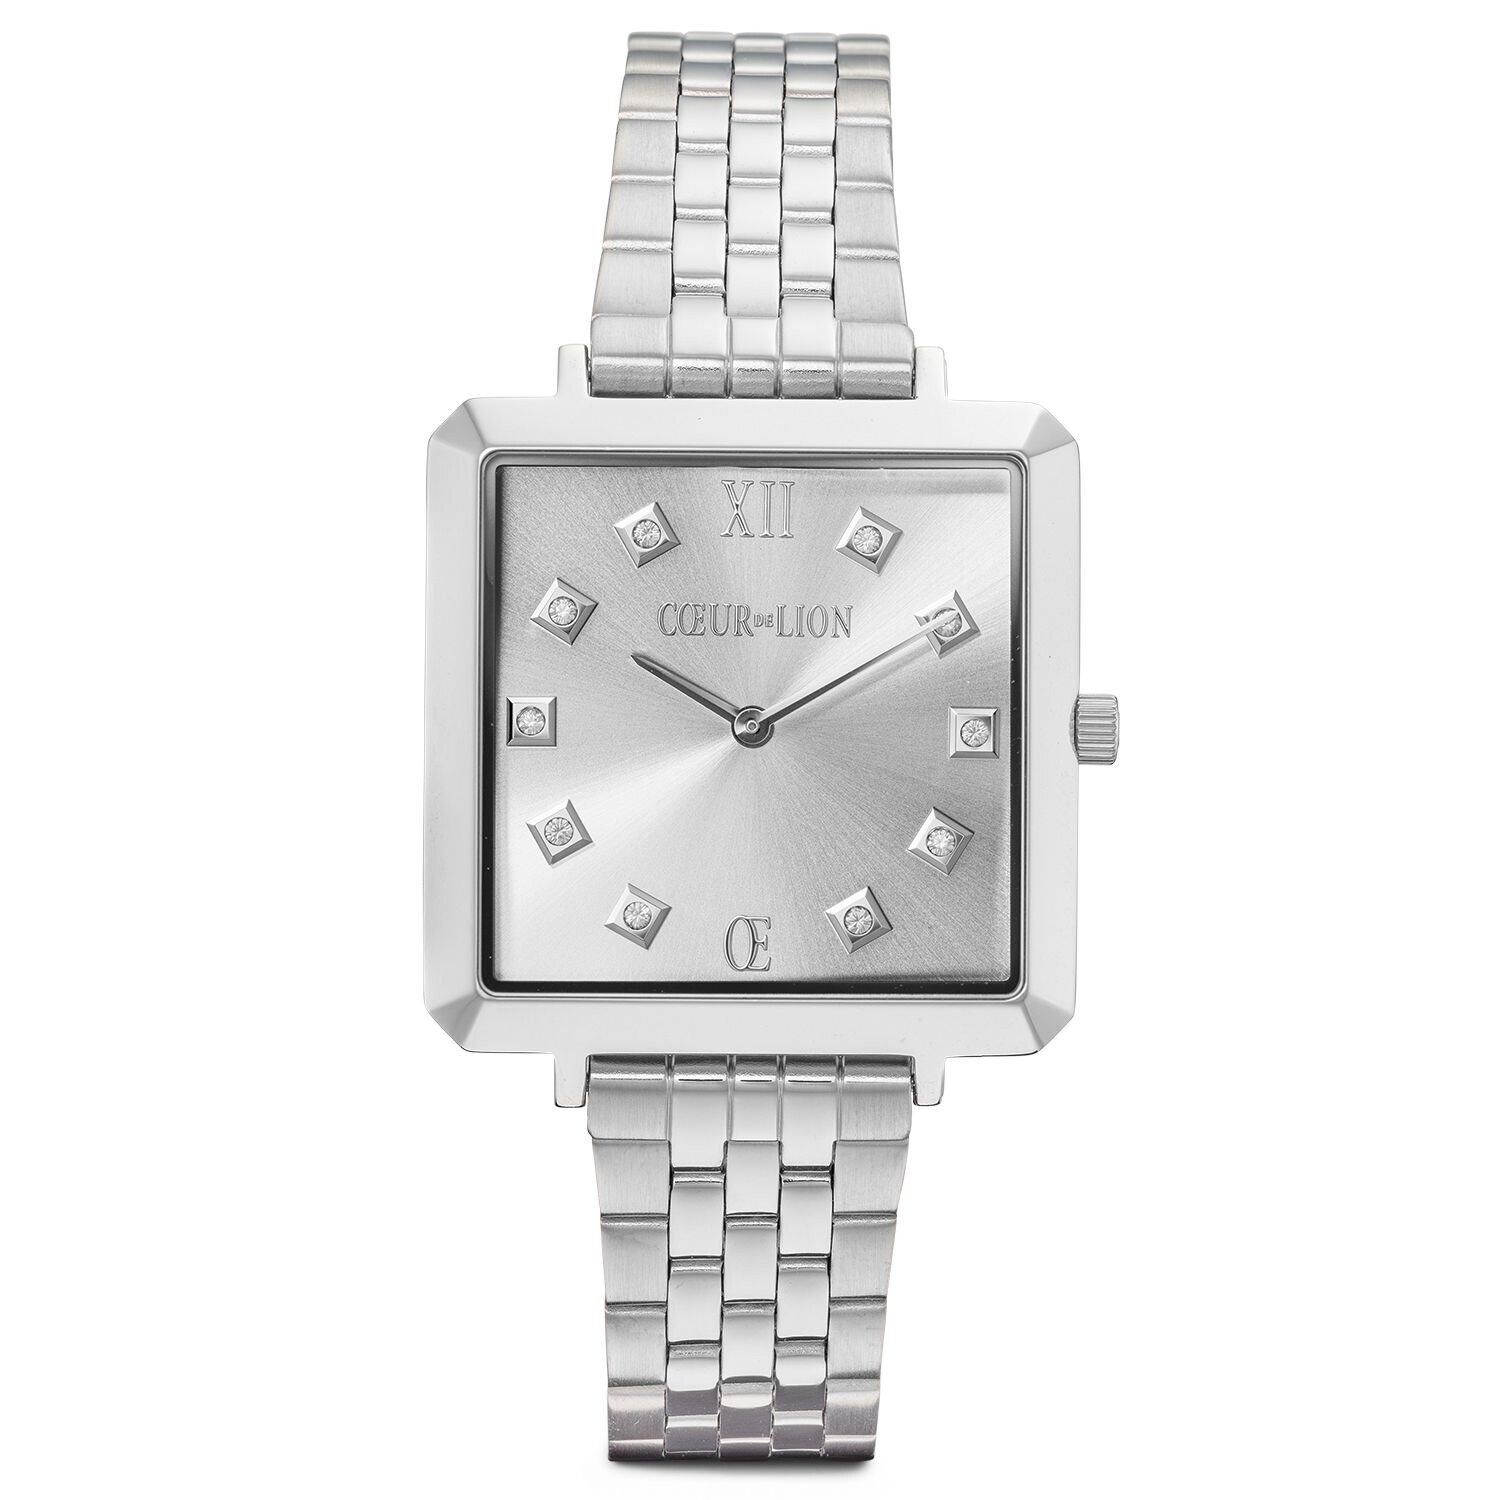 Watch Iconic Square Elegant Monochrome Silver Stainless Steel